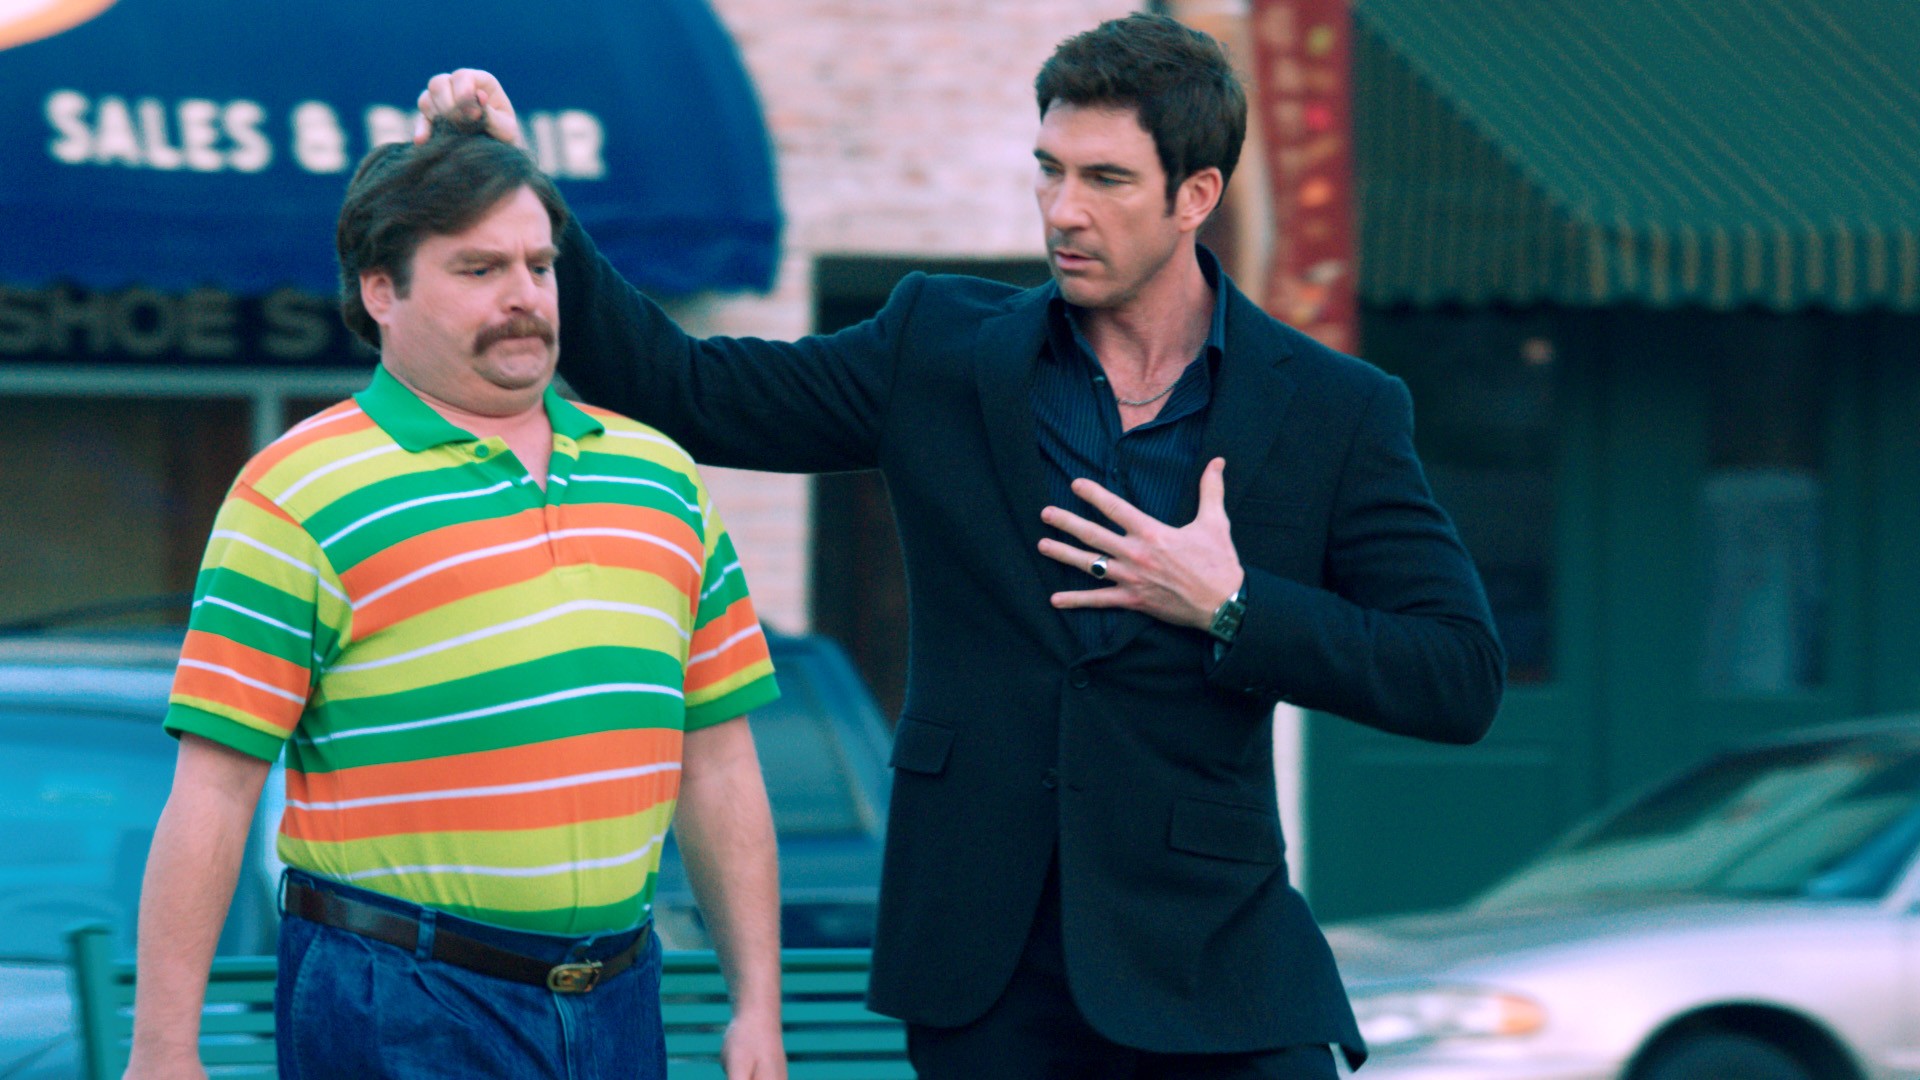 Zach Galifianakis stars as Marty Huggins and Dylan McDermott stars as Tim Wattley in Warner Bros. Pictures' The Campaign (2012)